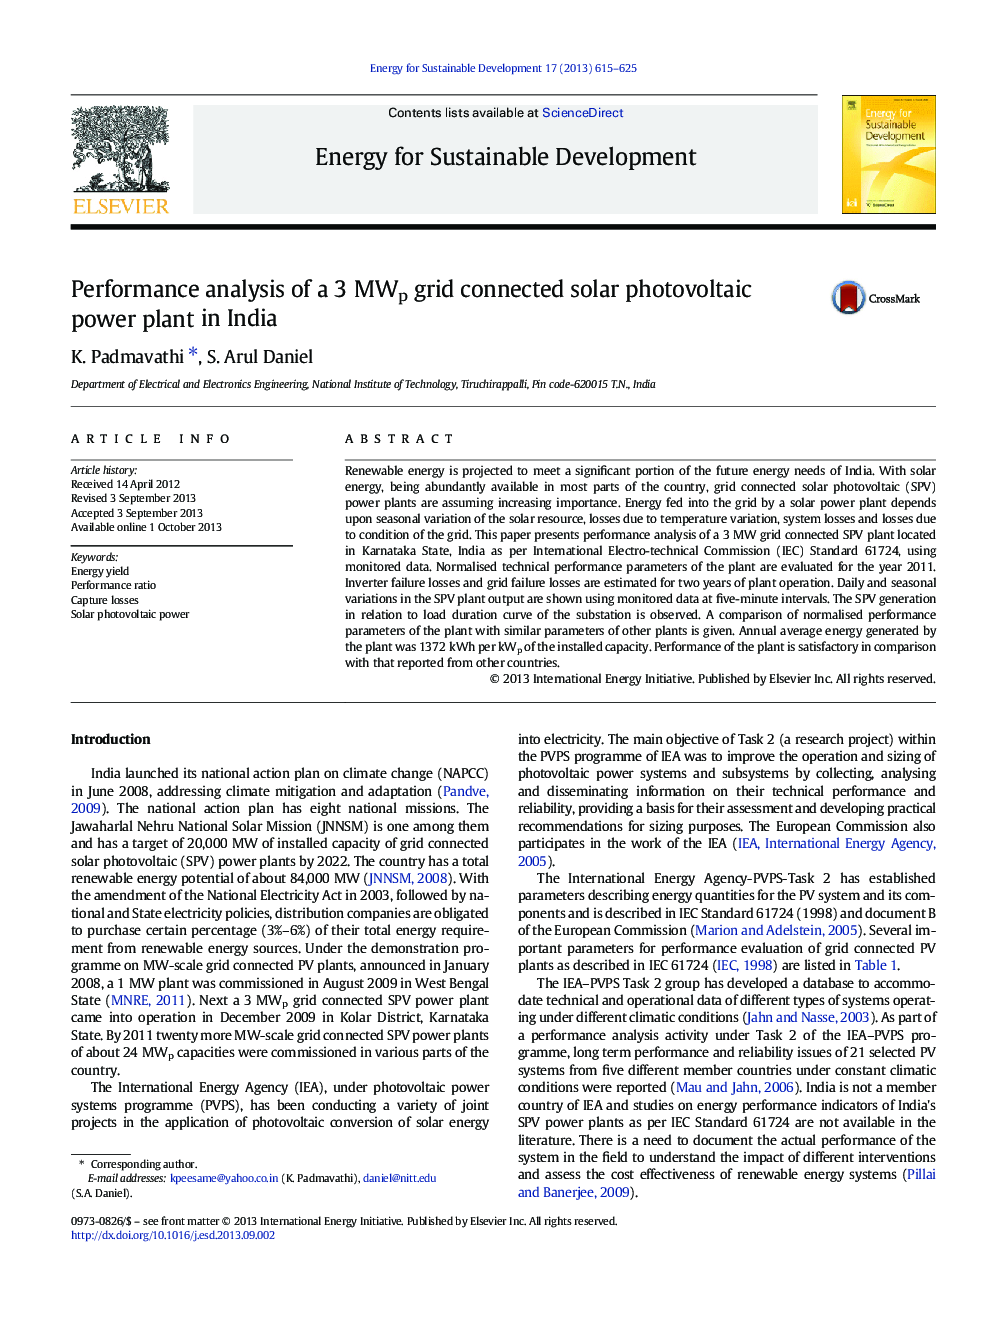 Performance analysis of a 3 MWp grid connected solar photovoltaic power plant in India